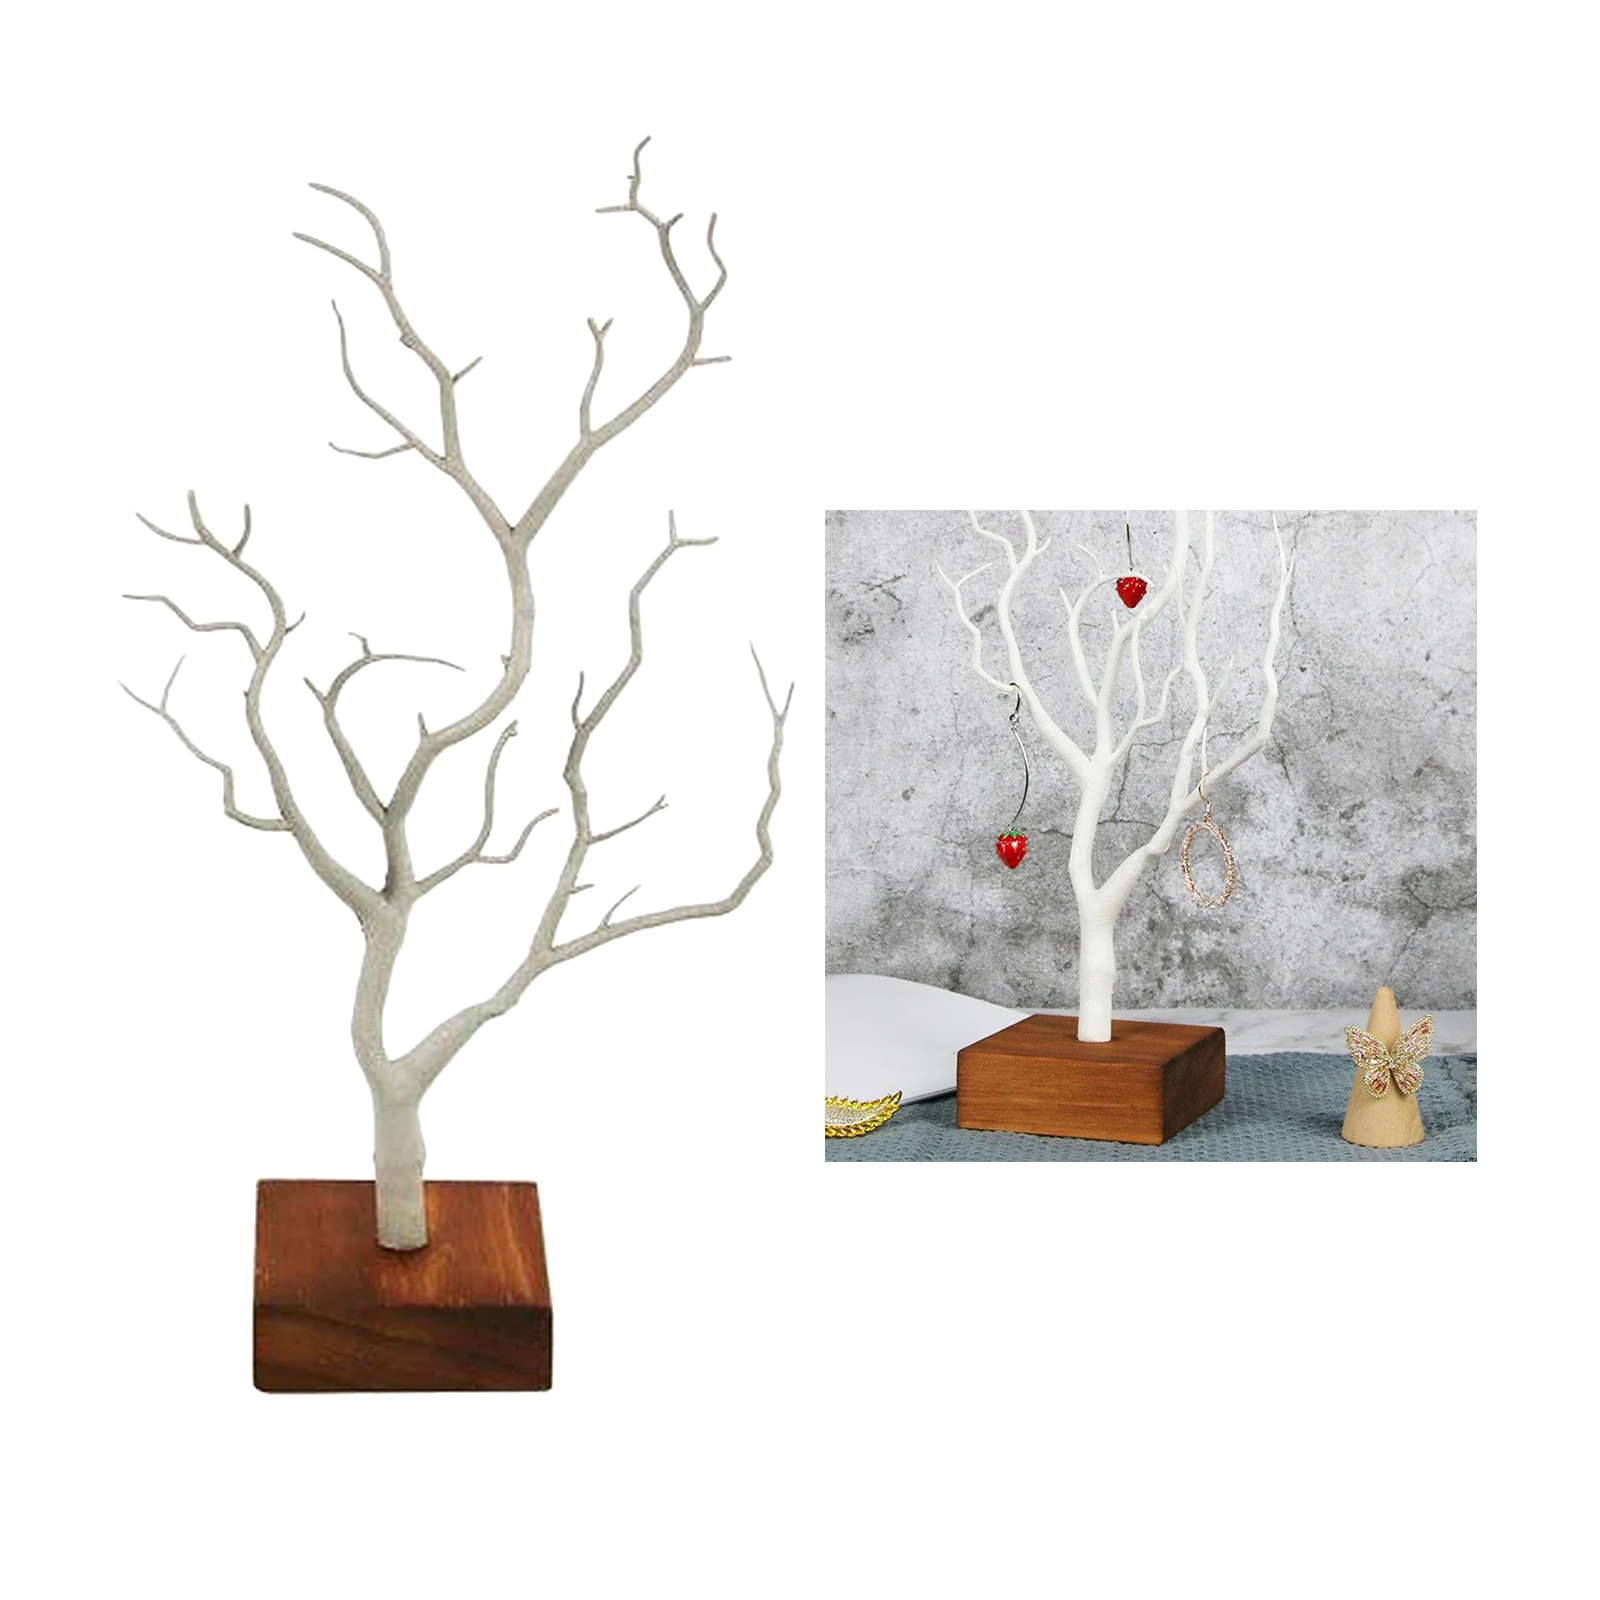 Jewelry Stand - Tree Jewelry Stand Display Rack Earring Necklace Ring Holder Organizer Color: White